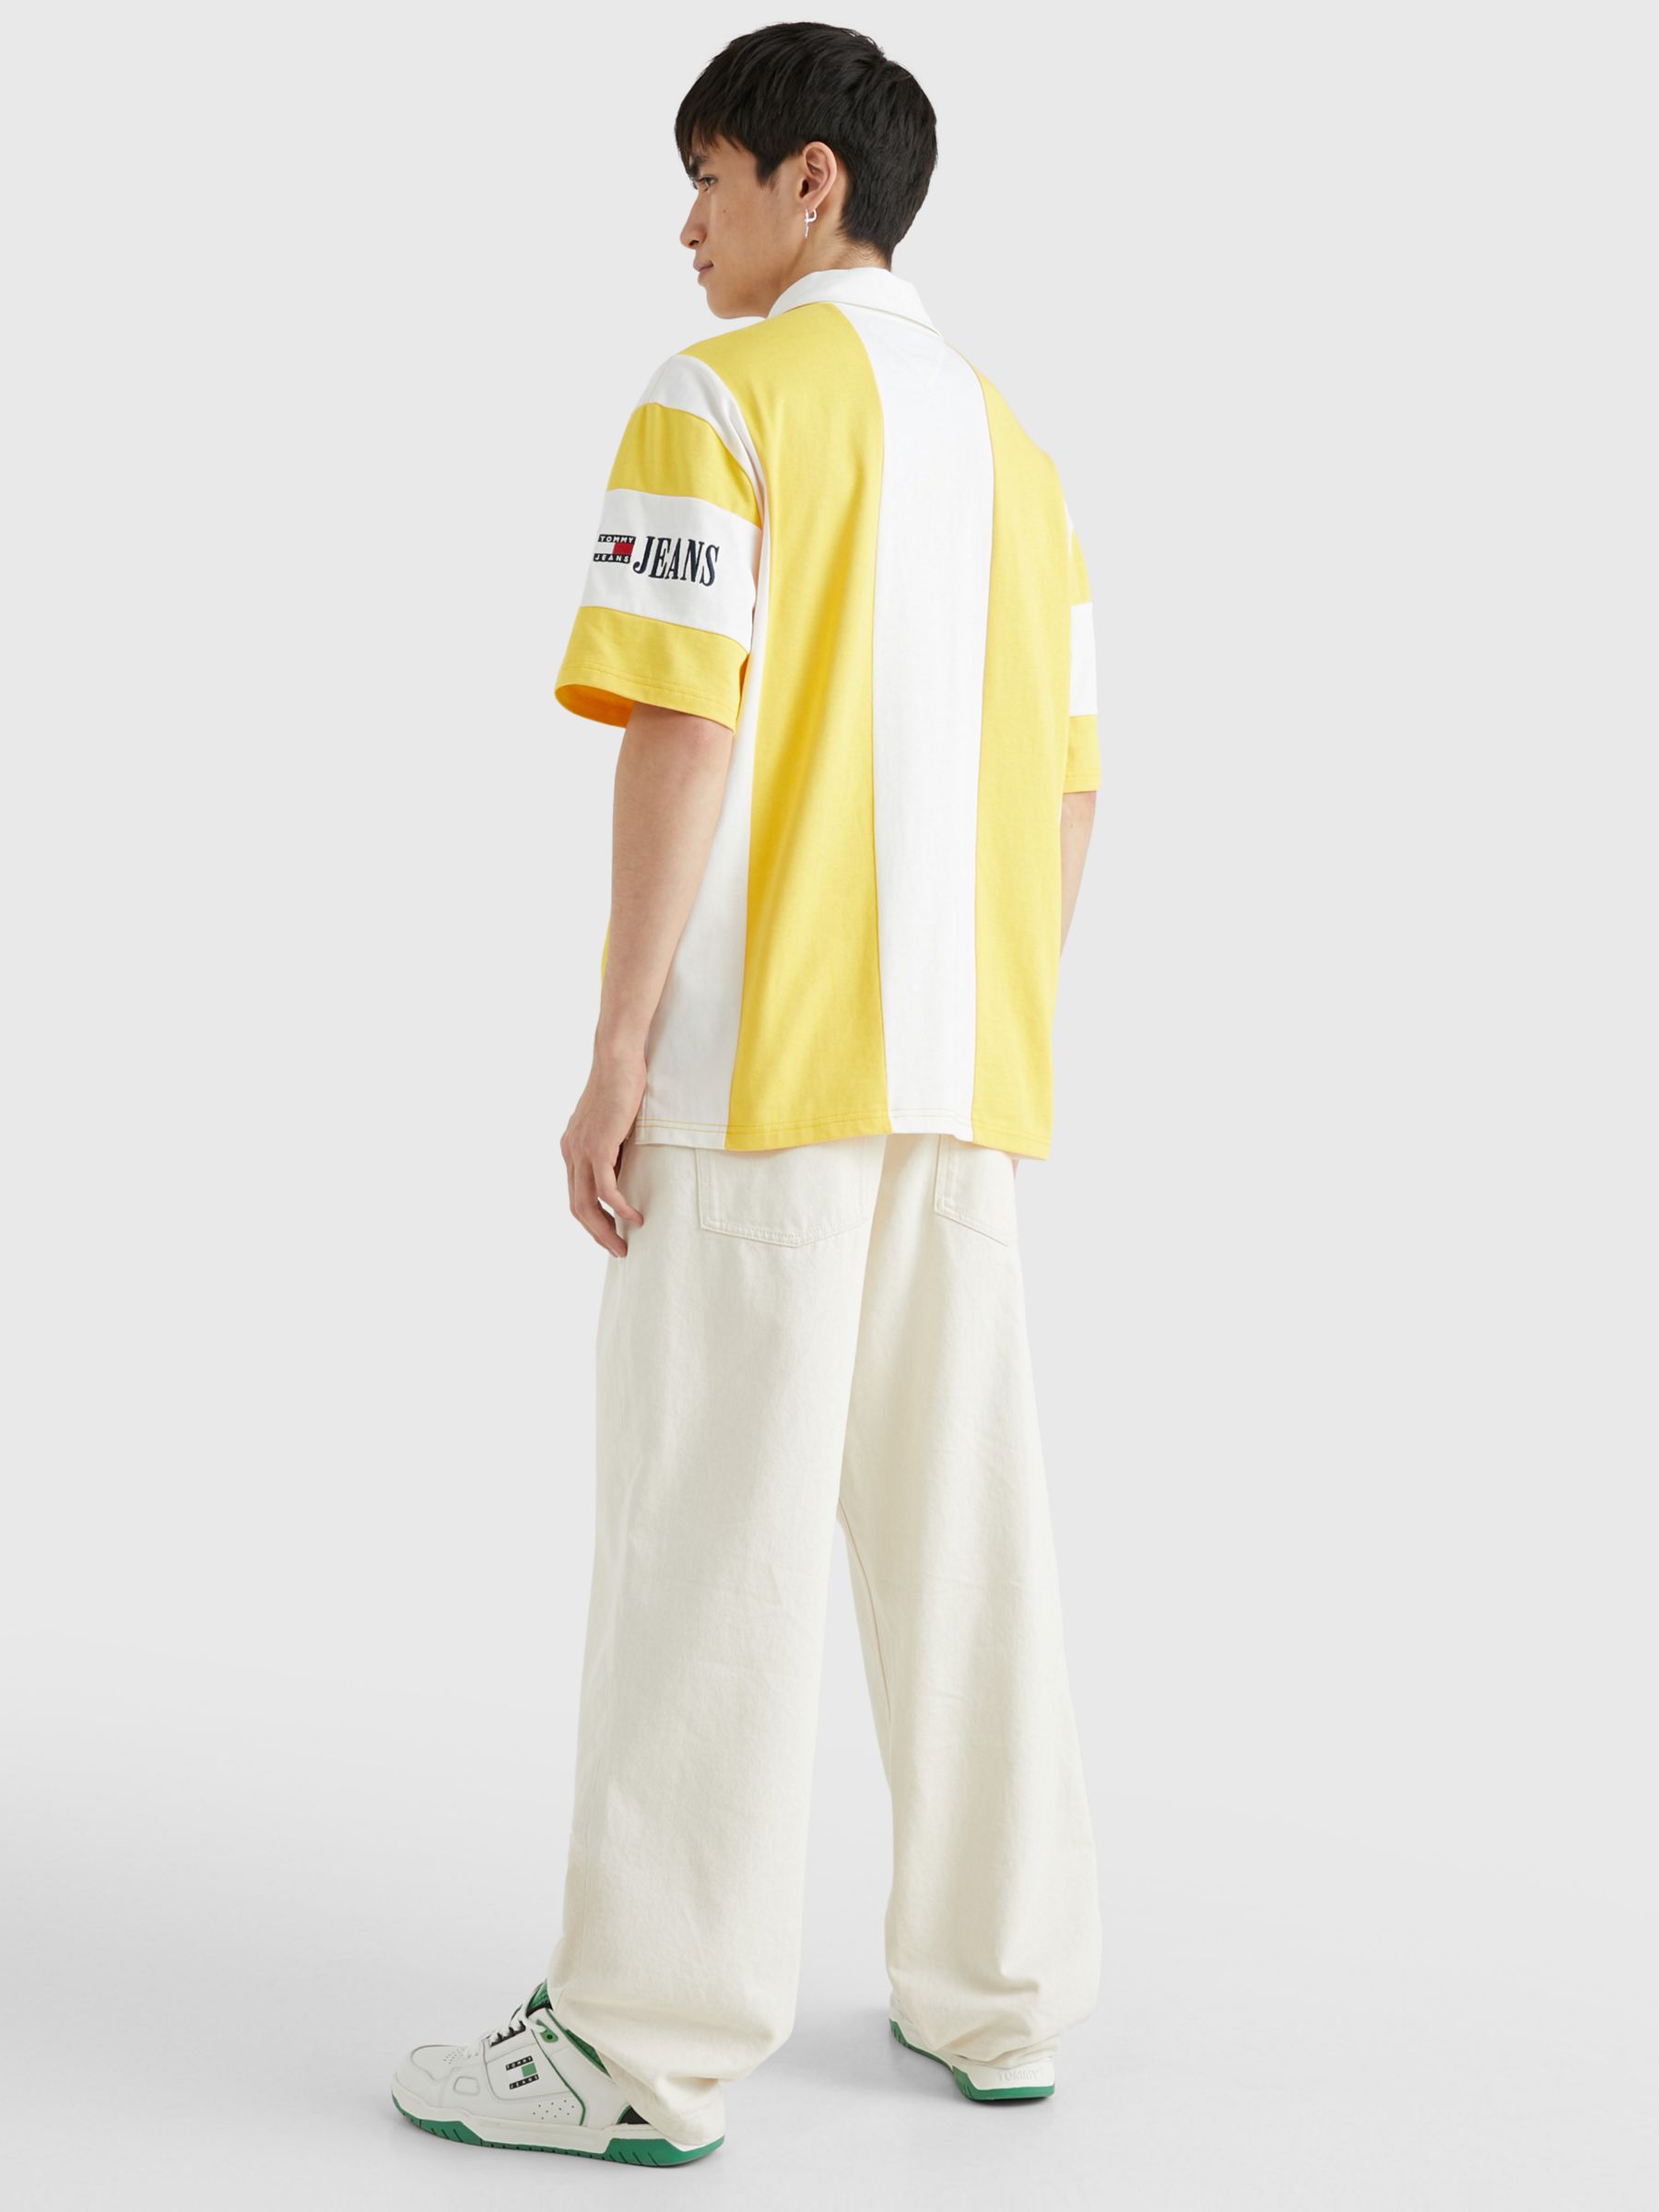 Buy Tommy Jeans Stripe Archive Short Sleeve Polo Shirt, Star Yel White Online at johnlewis.com